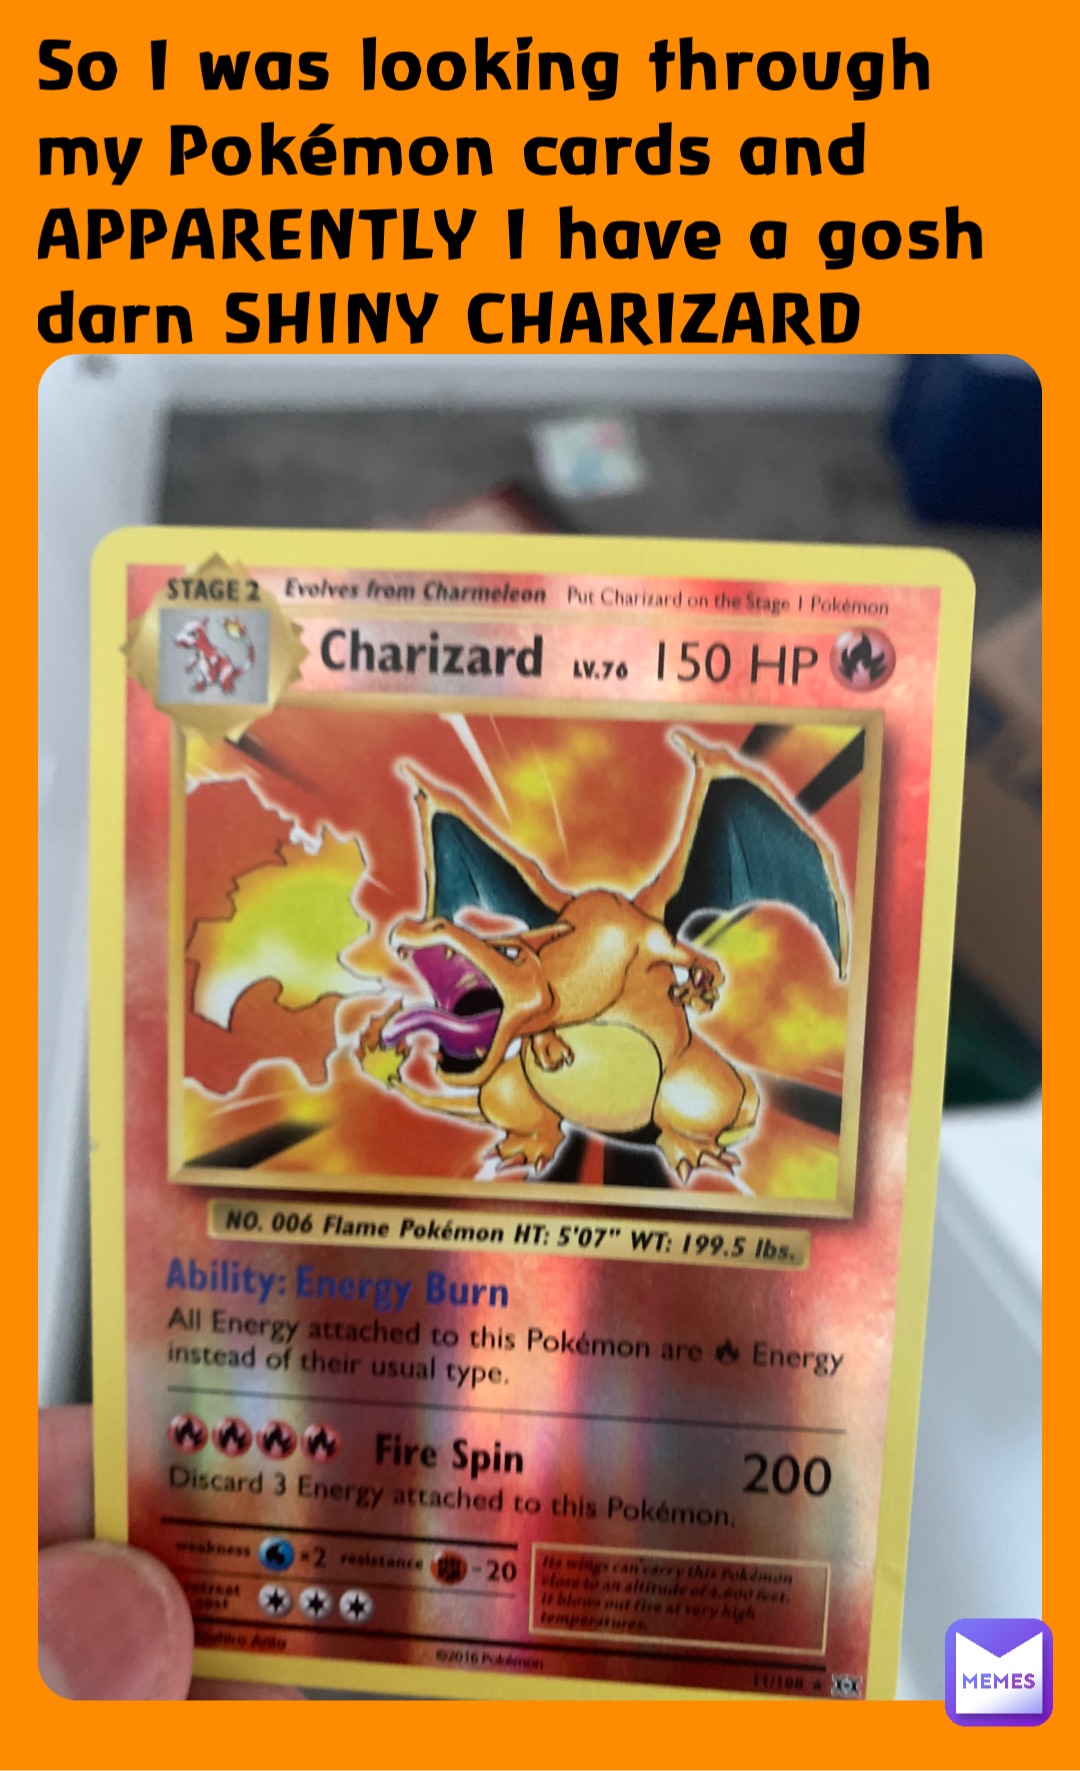 So I was looking through my Pokémon cards and APPARENTLY I have a gosh darn SHINY CHARIZARD